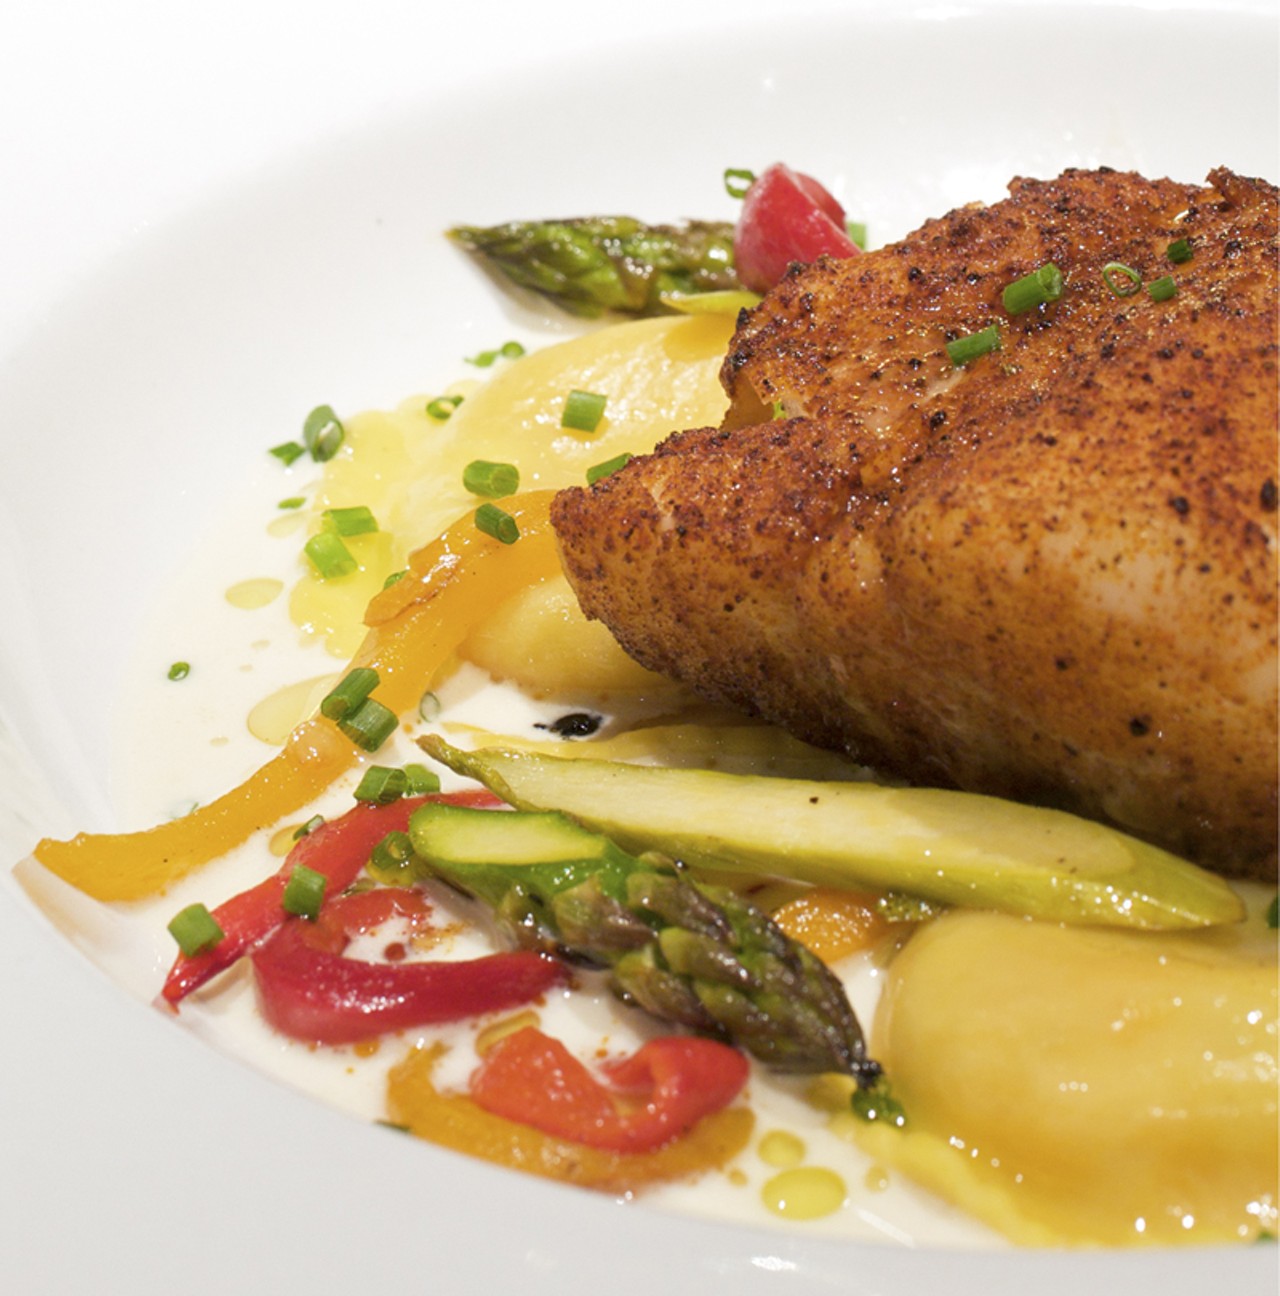 The chili-roasted Cod, one of the house specialties, is served with lobster ravioli, roasted peppers, grilled asparagus and Champagne sauce.